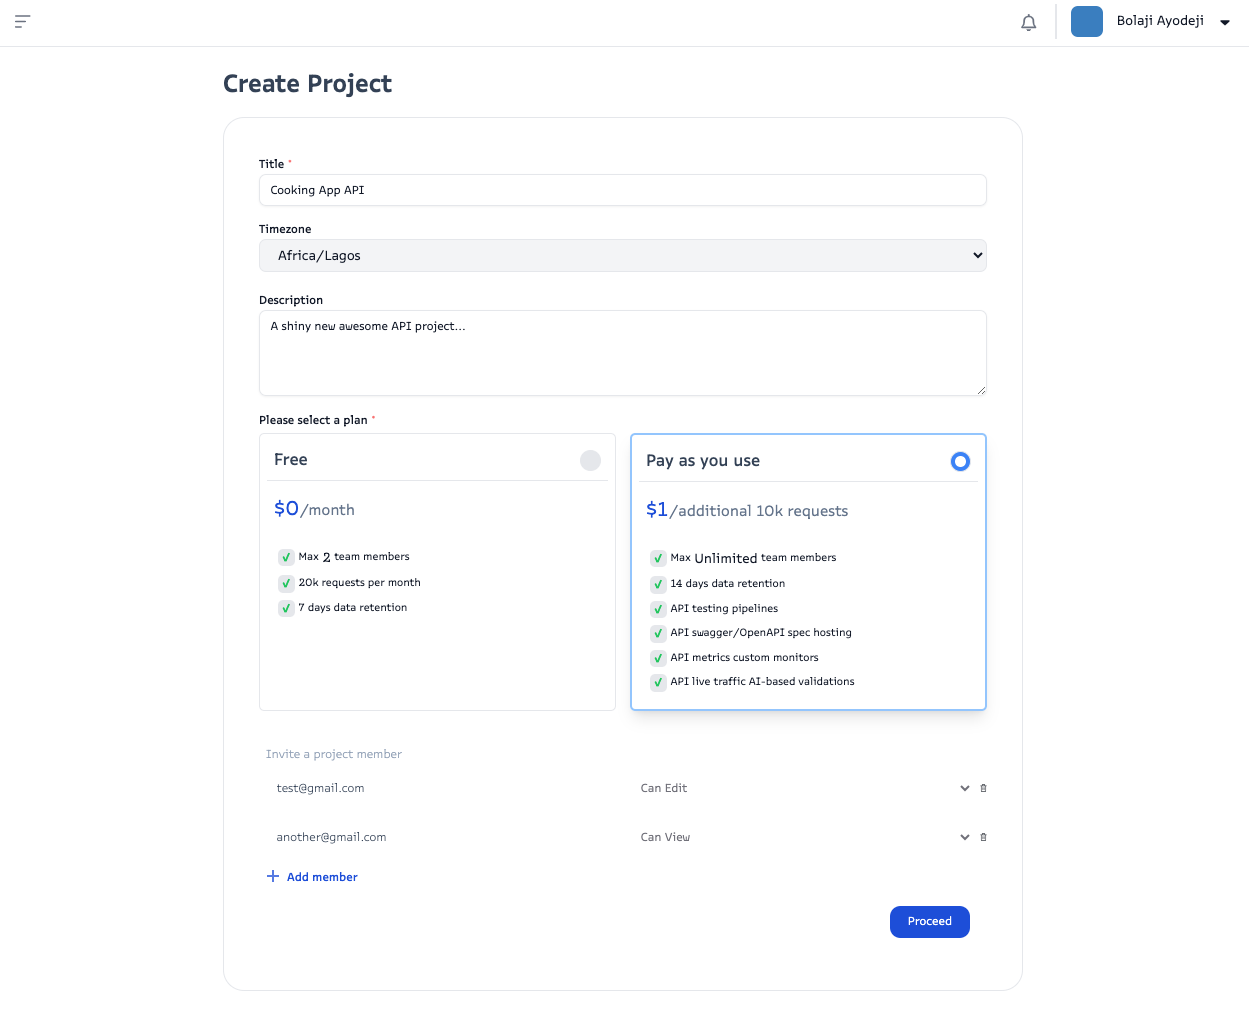 Screenshot of APItoolkit's create new project page